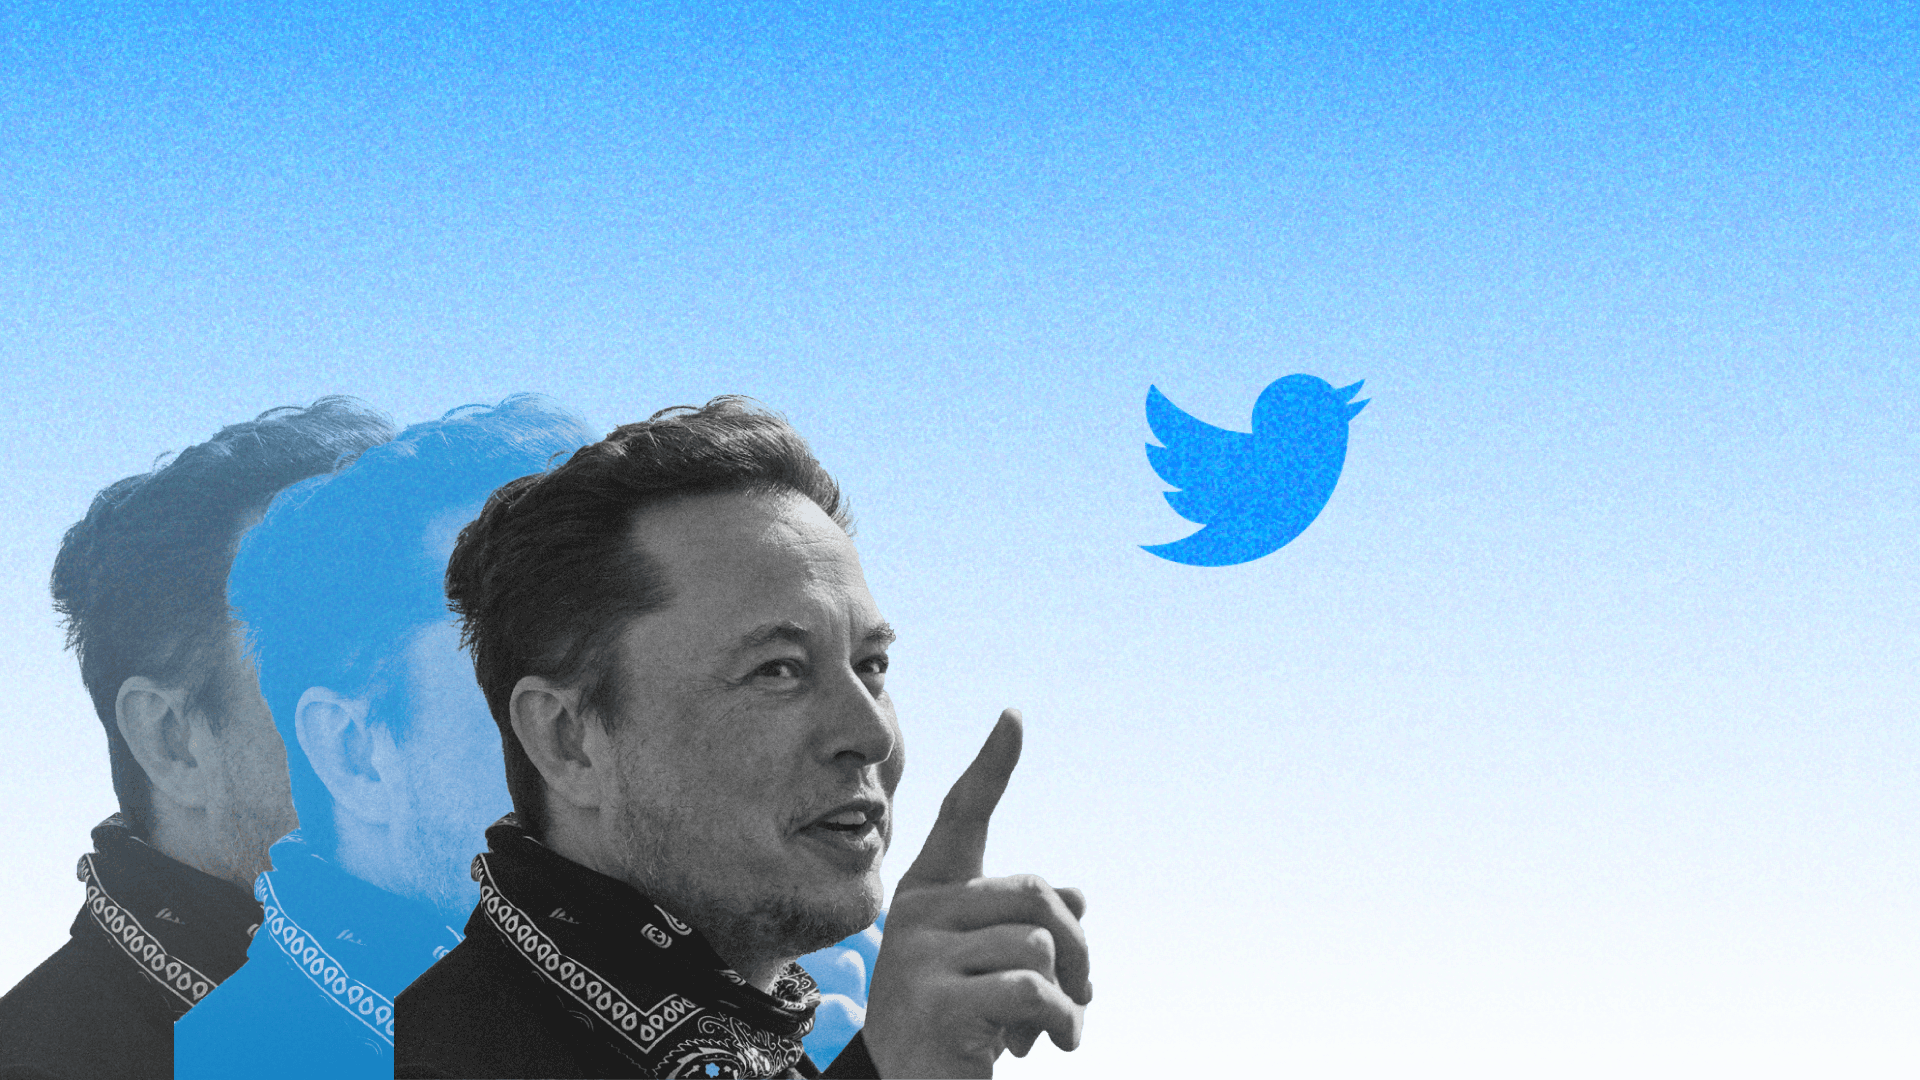 Here’s what Elon Musk has tweeted over the years … about Twitter